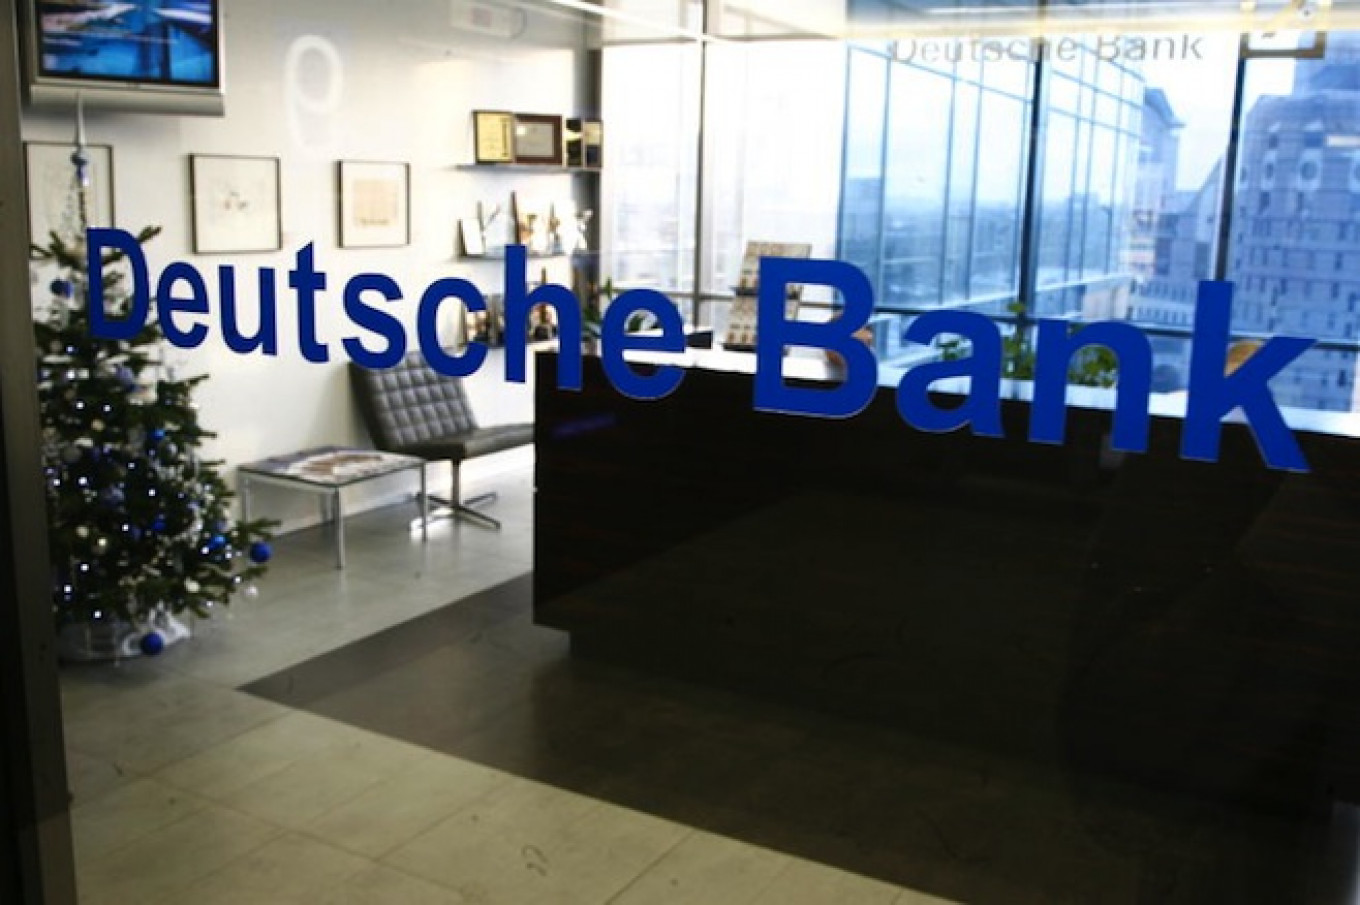 deutsche bank busted for russian money laundering